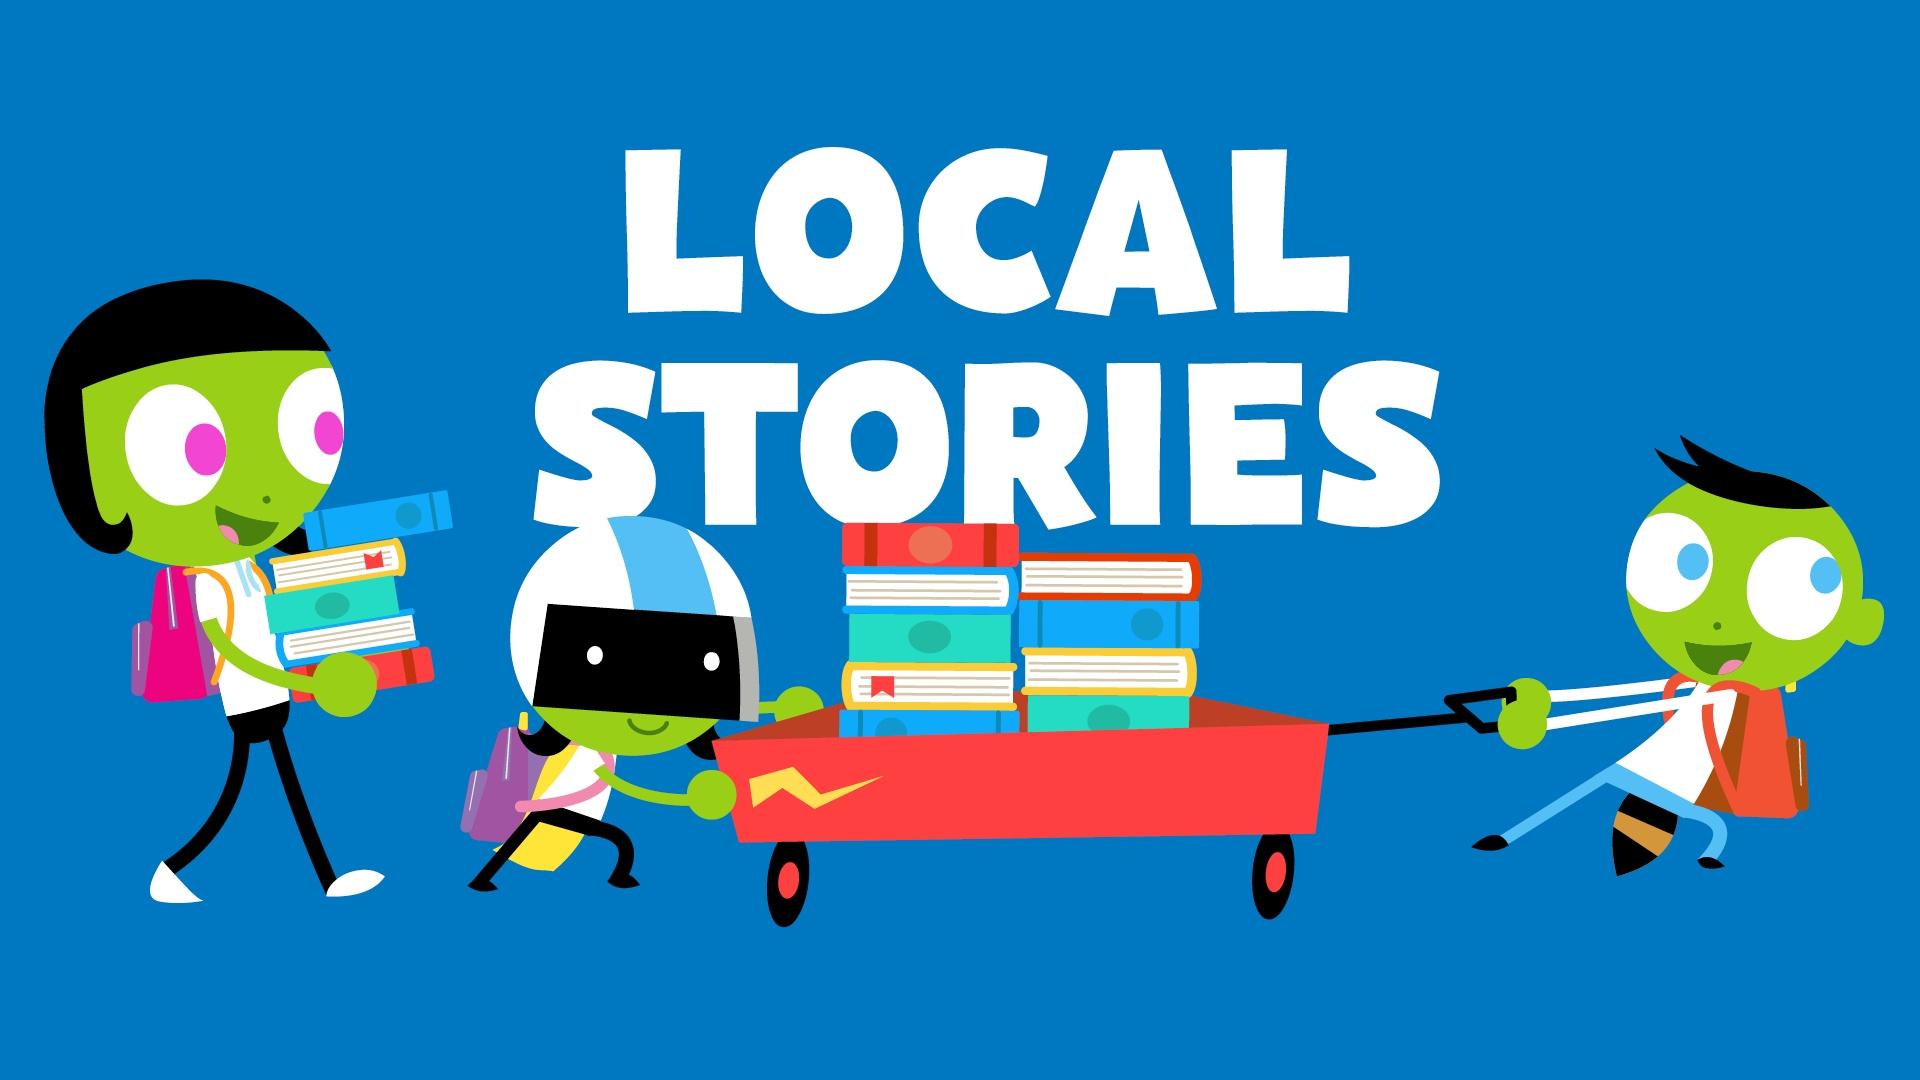 Local Stories - PBS Kids pulling wagon filled with books